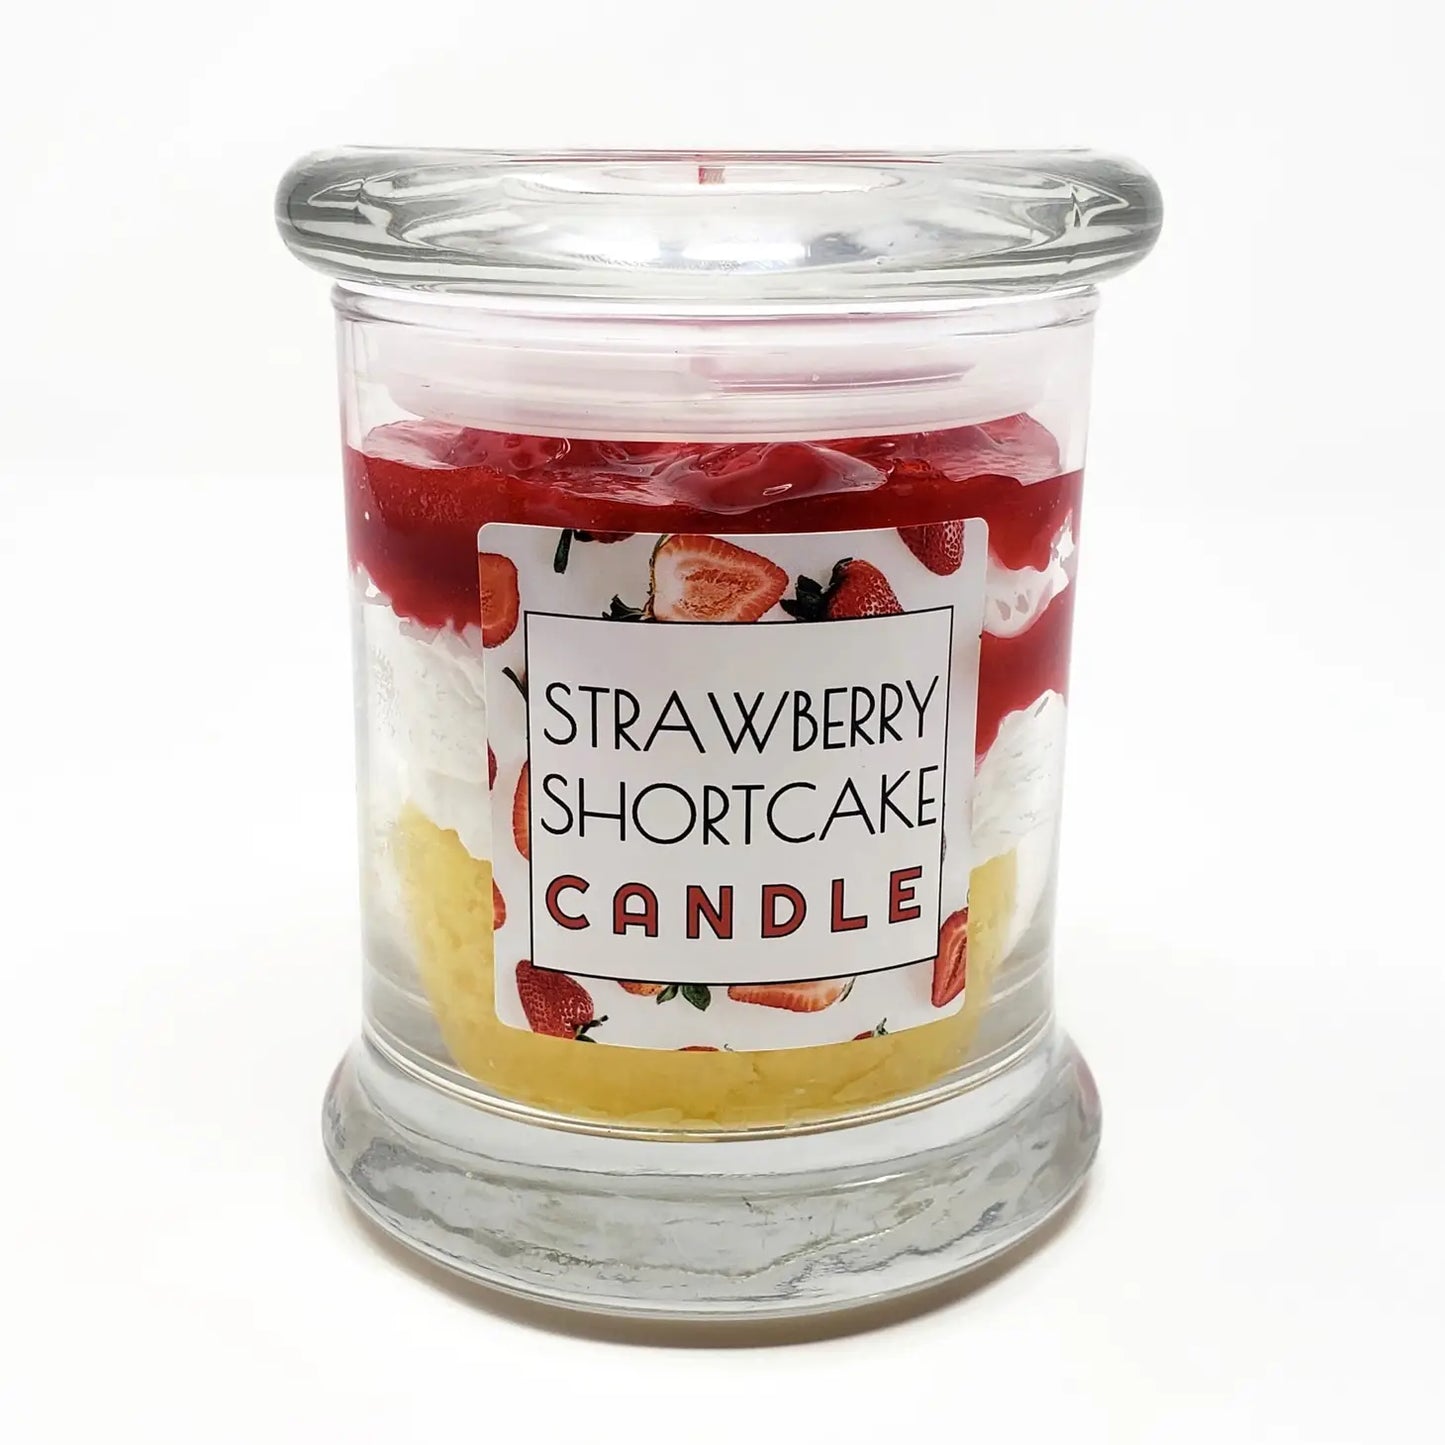 Jar Candle - Scented Strawberry Shortcake Candle with Lid